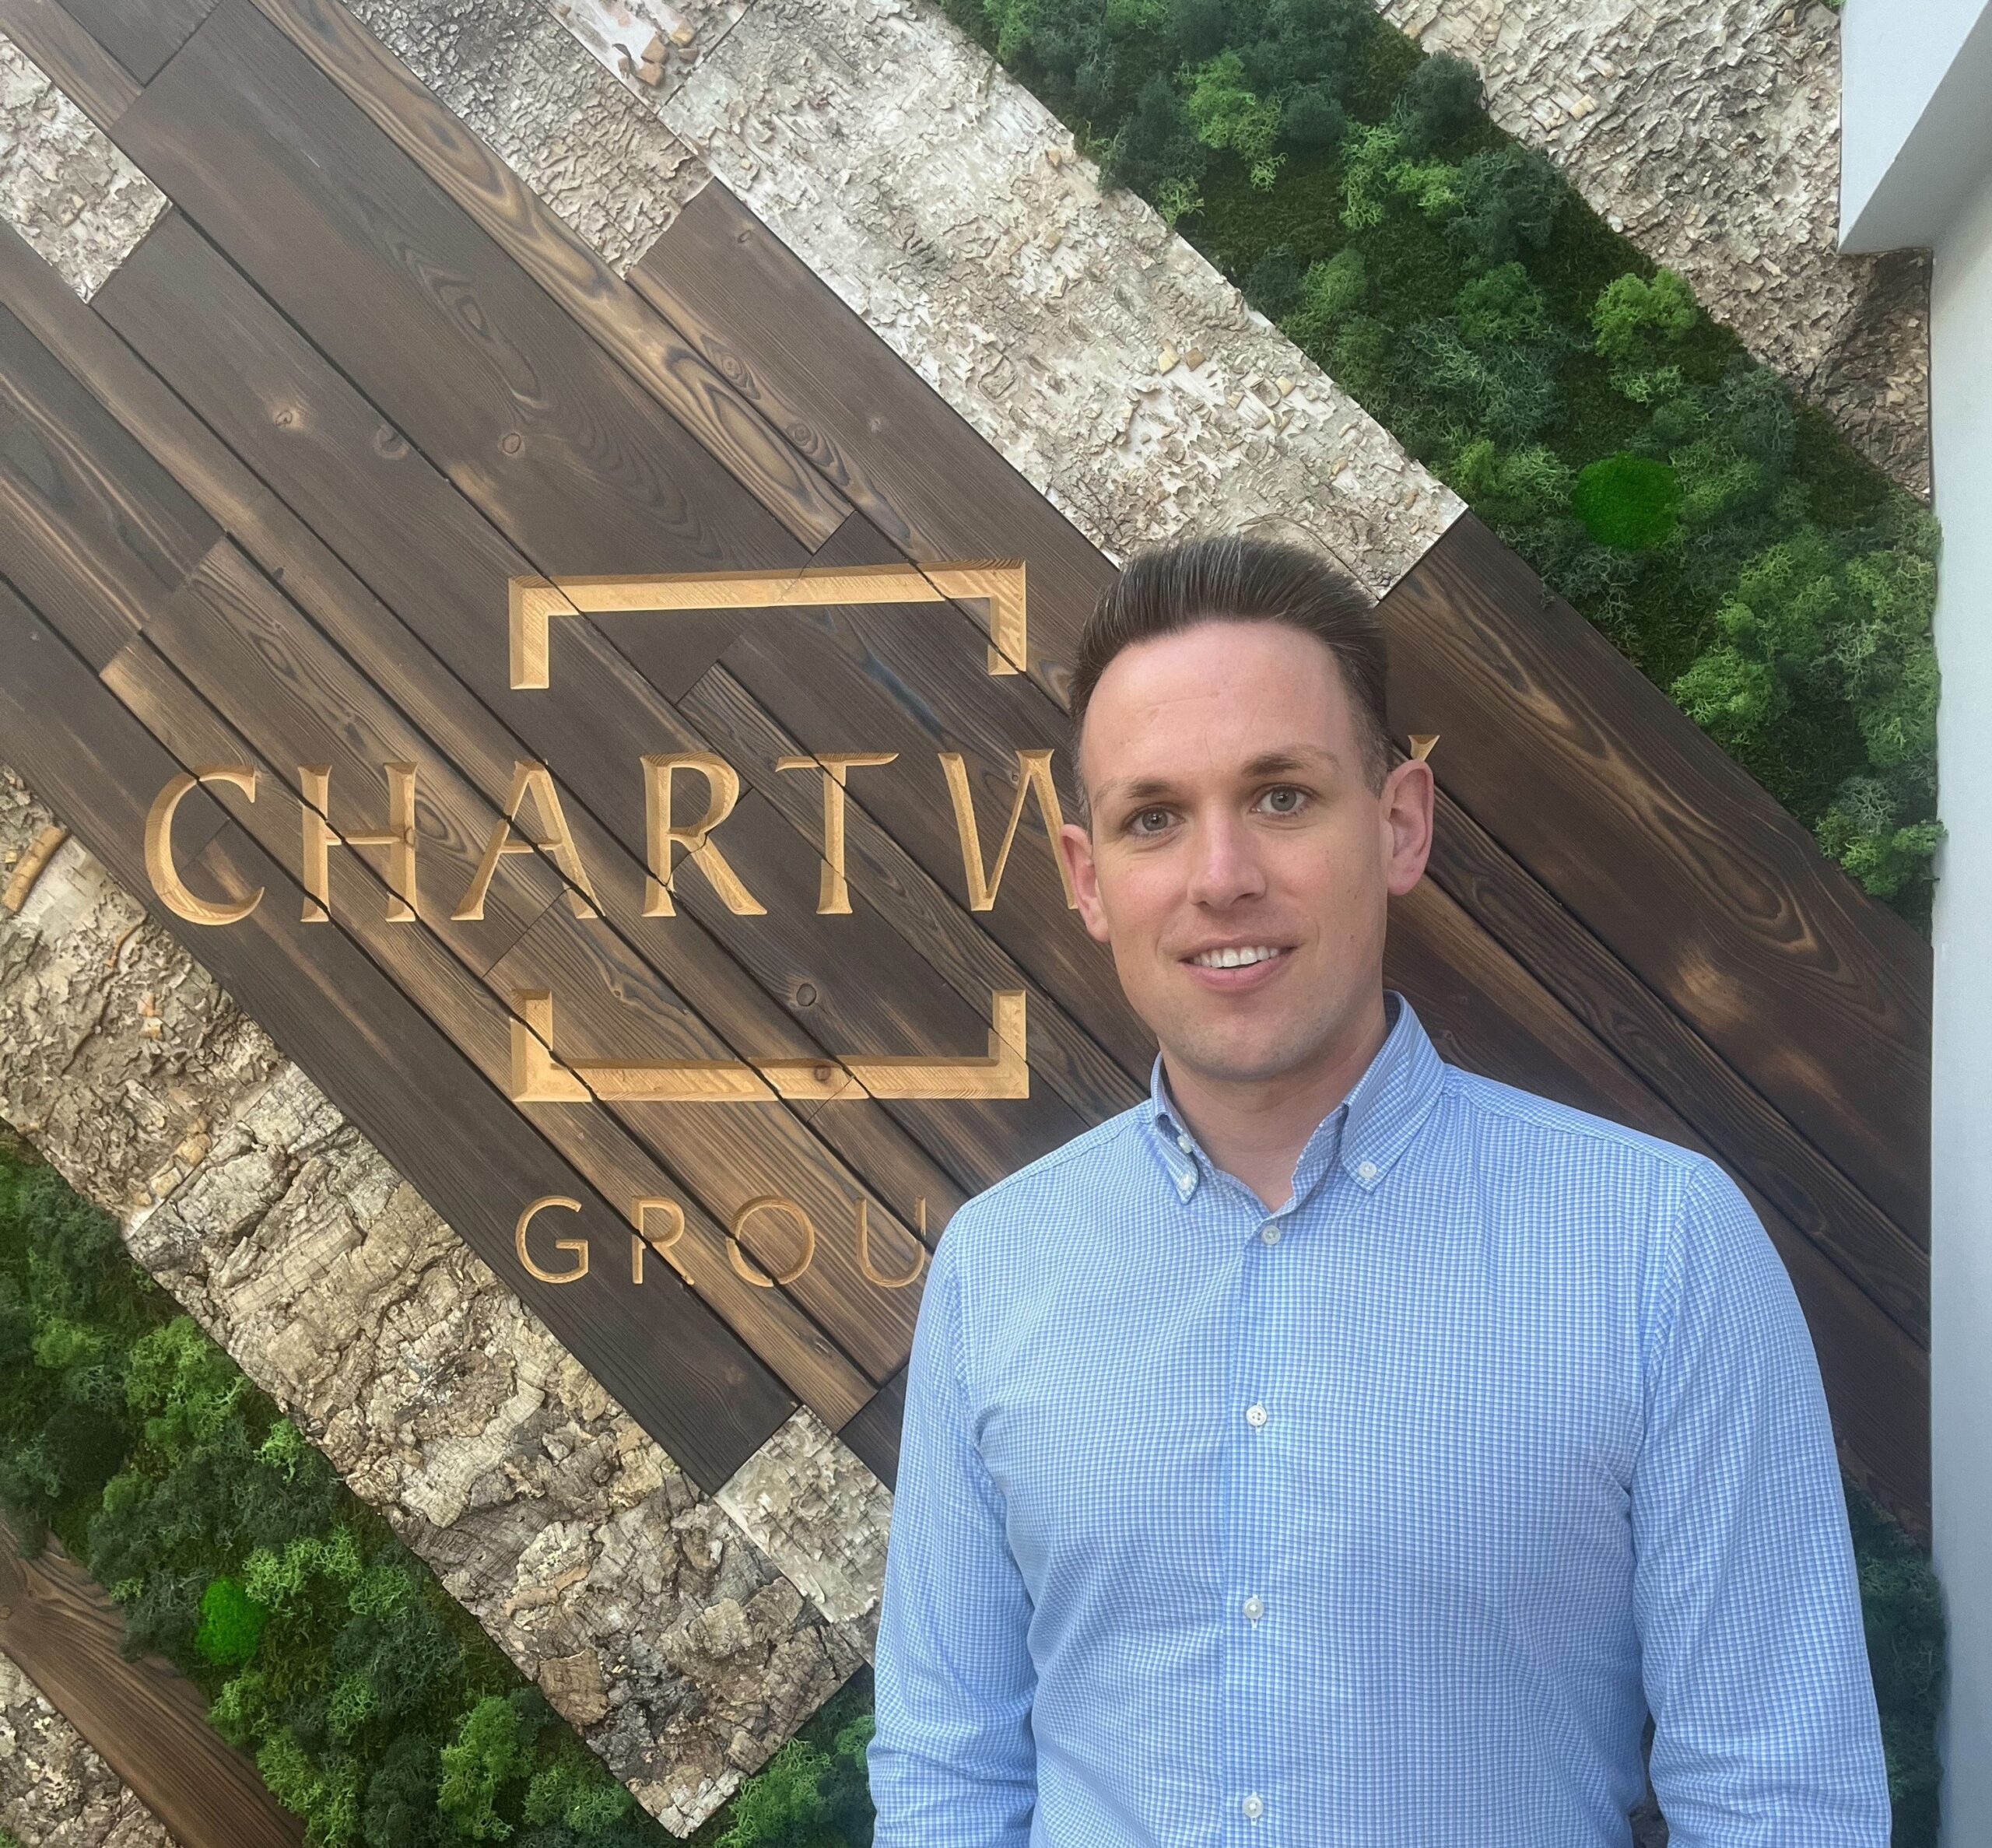 Chartway Construction appoints Richard Walker as new Commercial Director